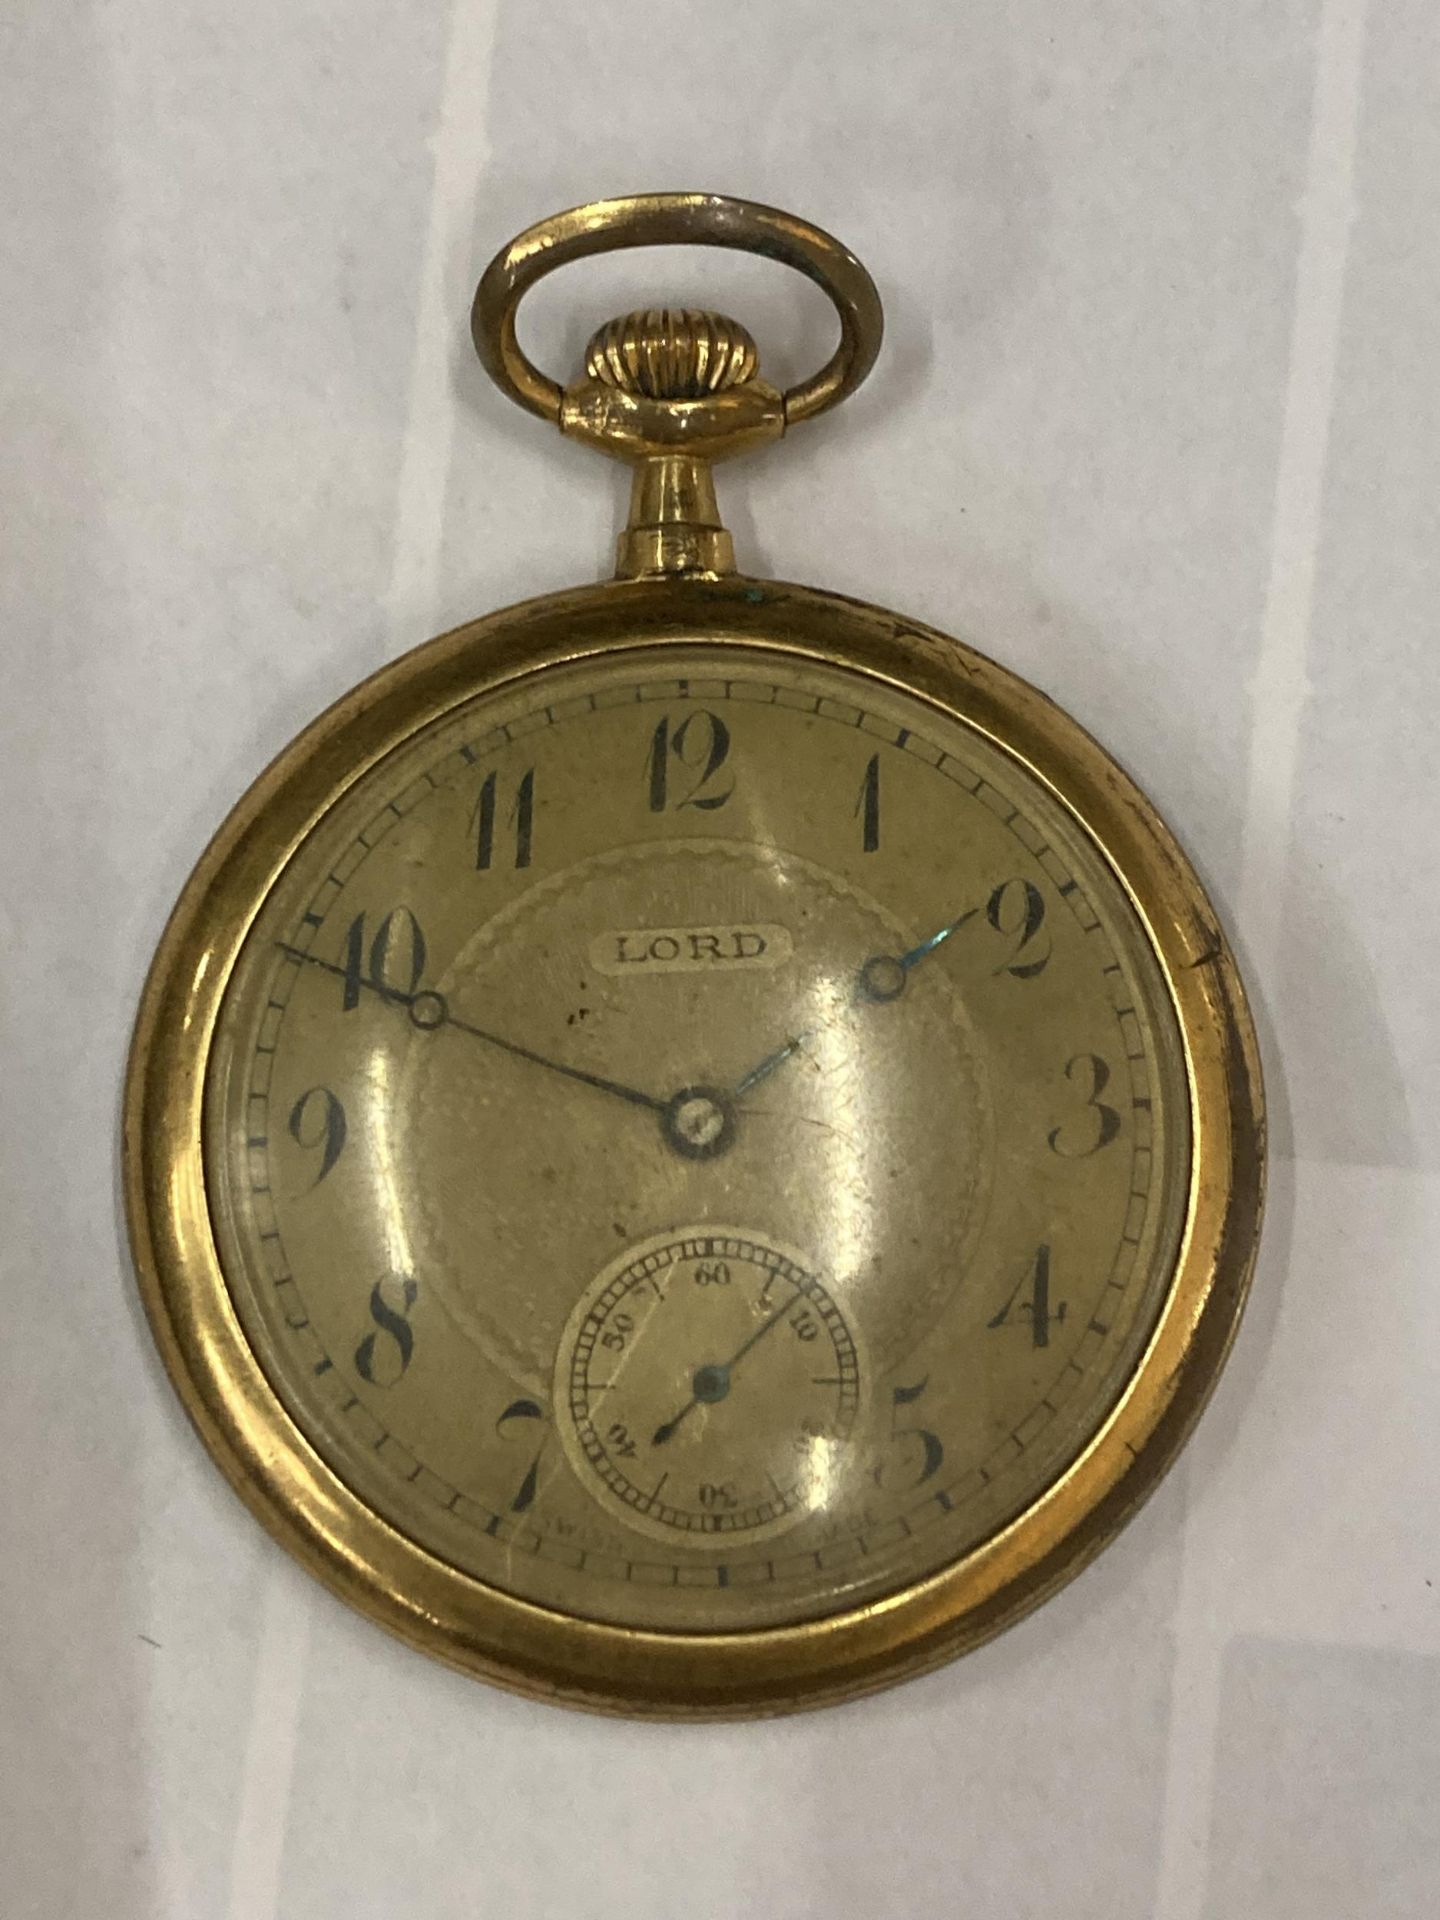 A VINTAGE LORD OPEN FACED POCKET WATCH